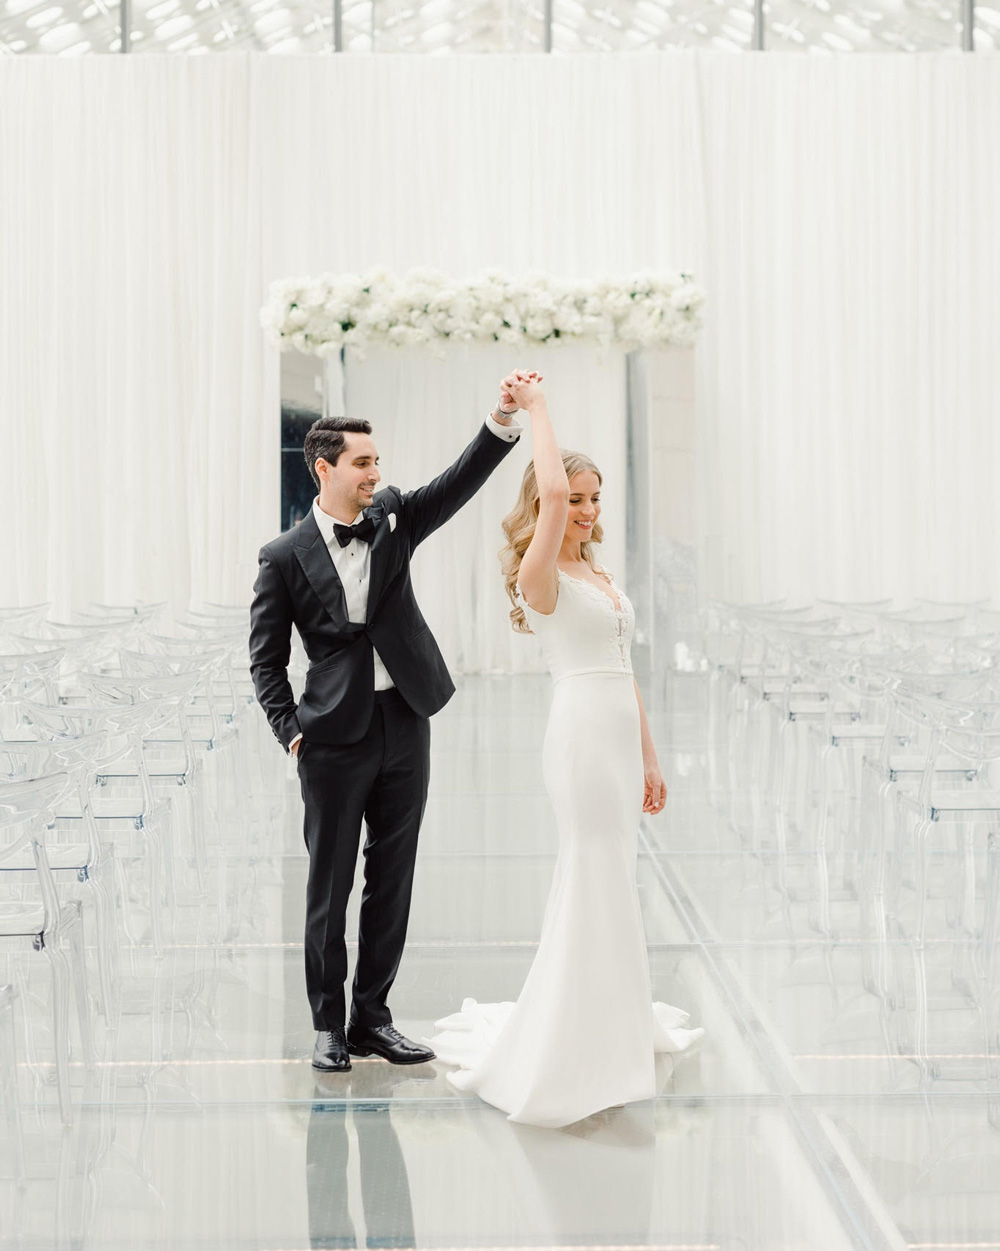 A young couple twirling in a beautiful white ballroom